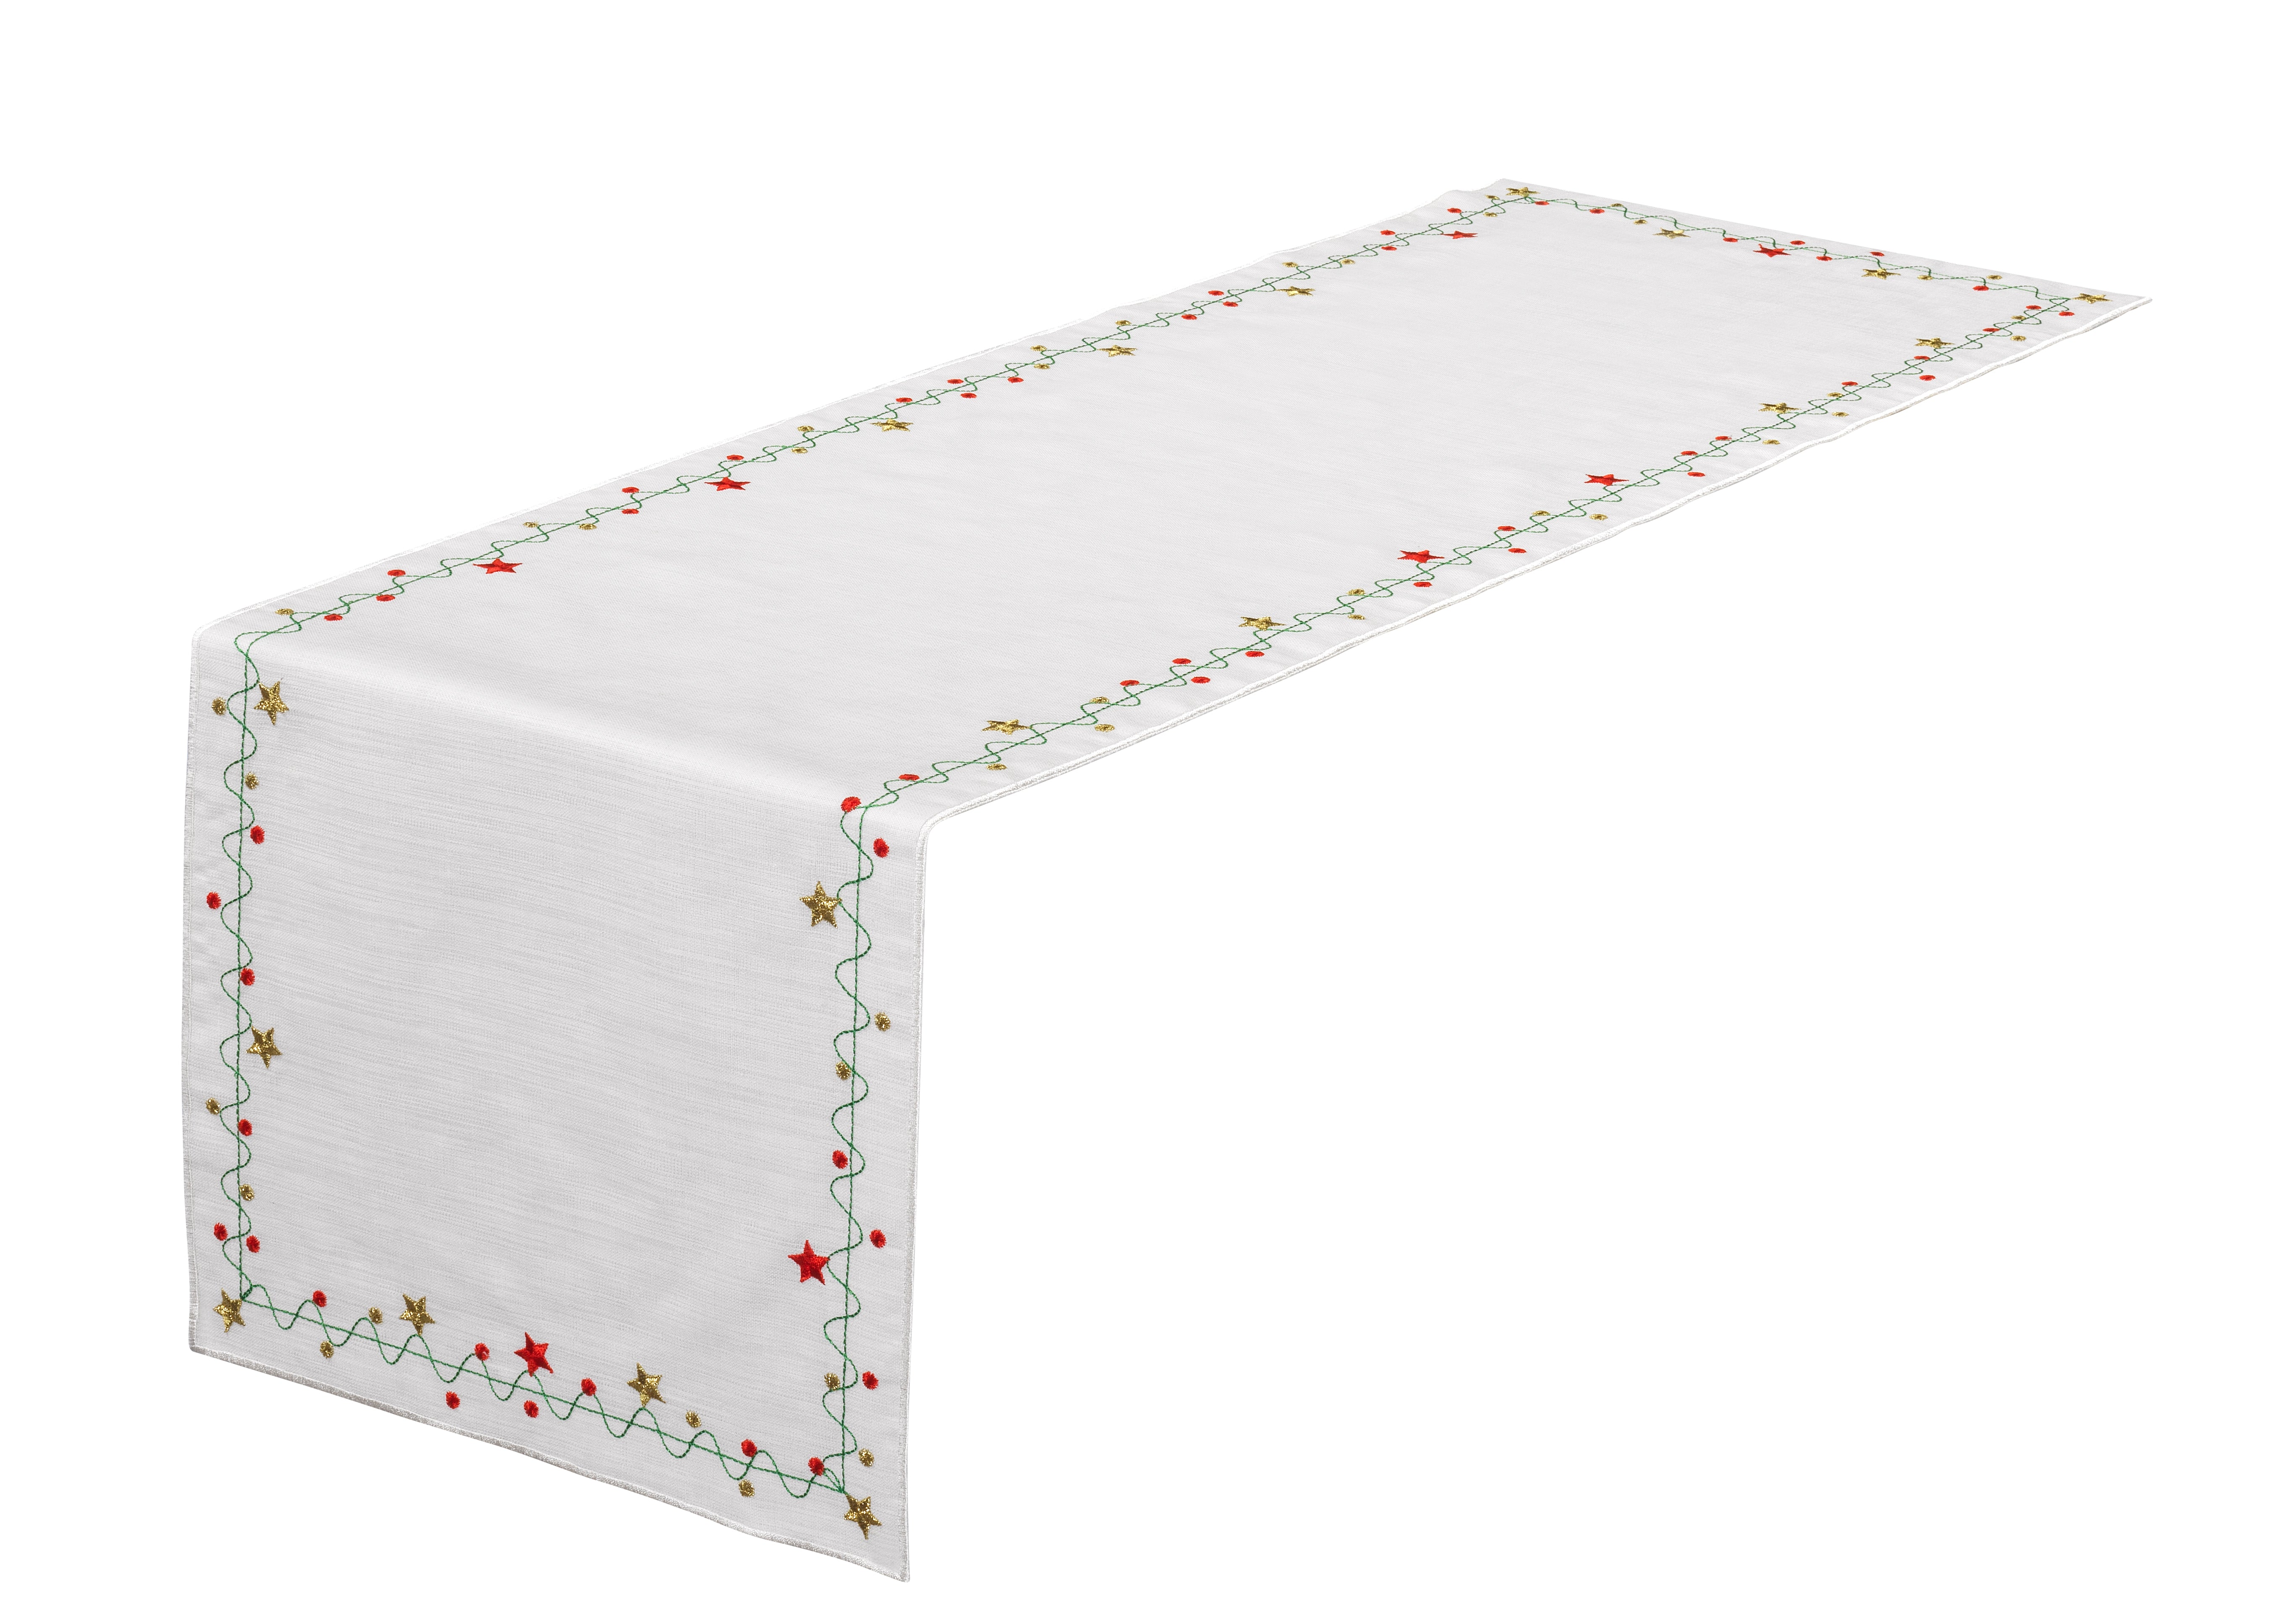 Christmas and Holiday Table Runners - Colorful and Festive, Great for Holiday Decorating - Wear Sierra